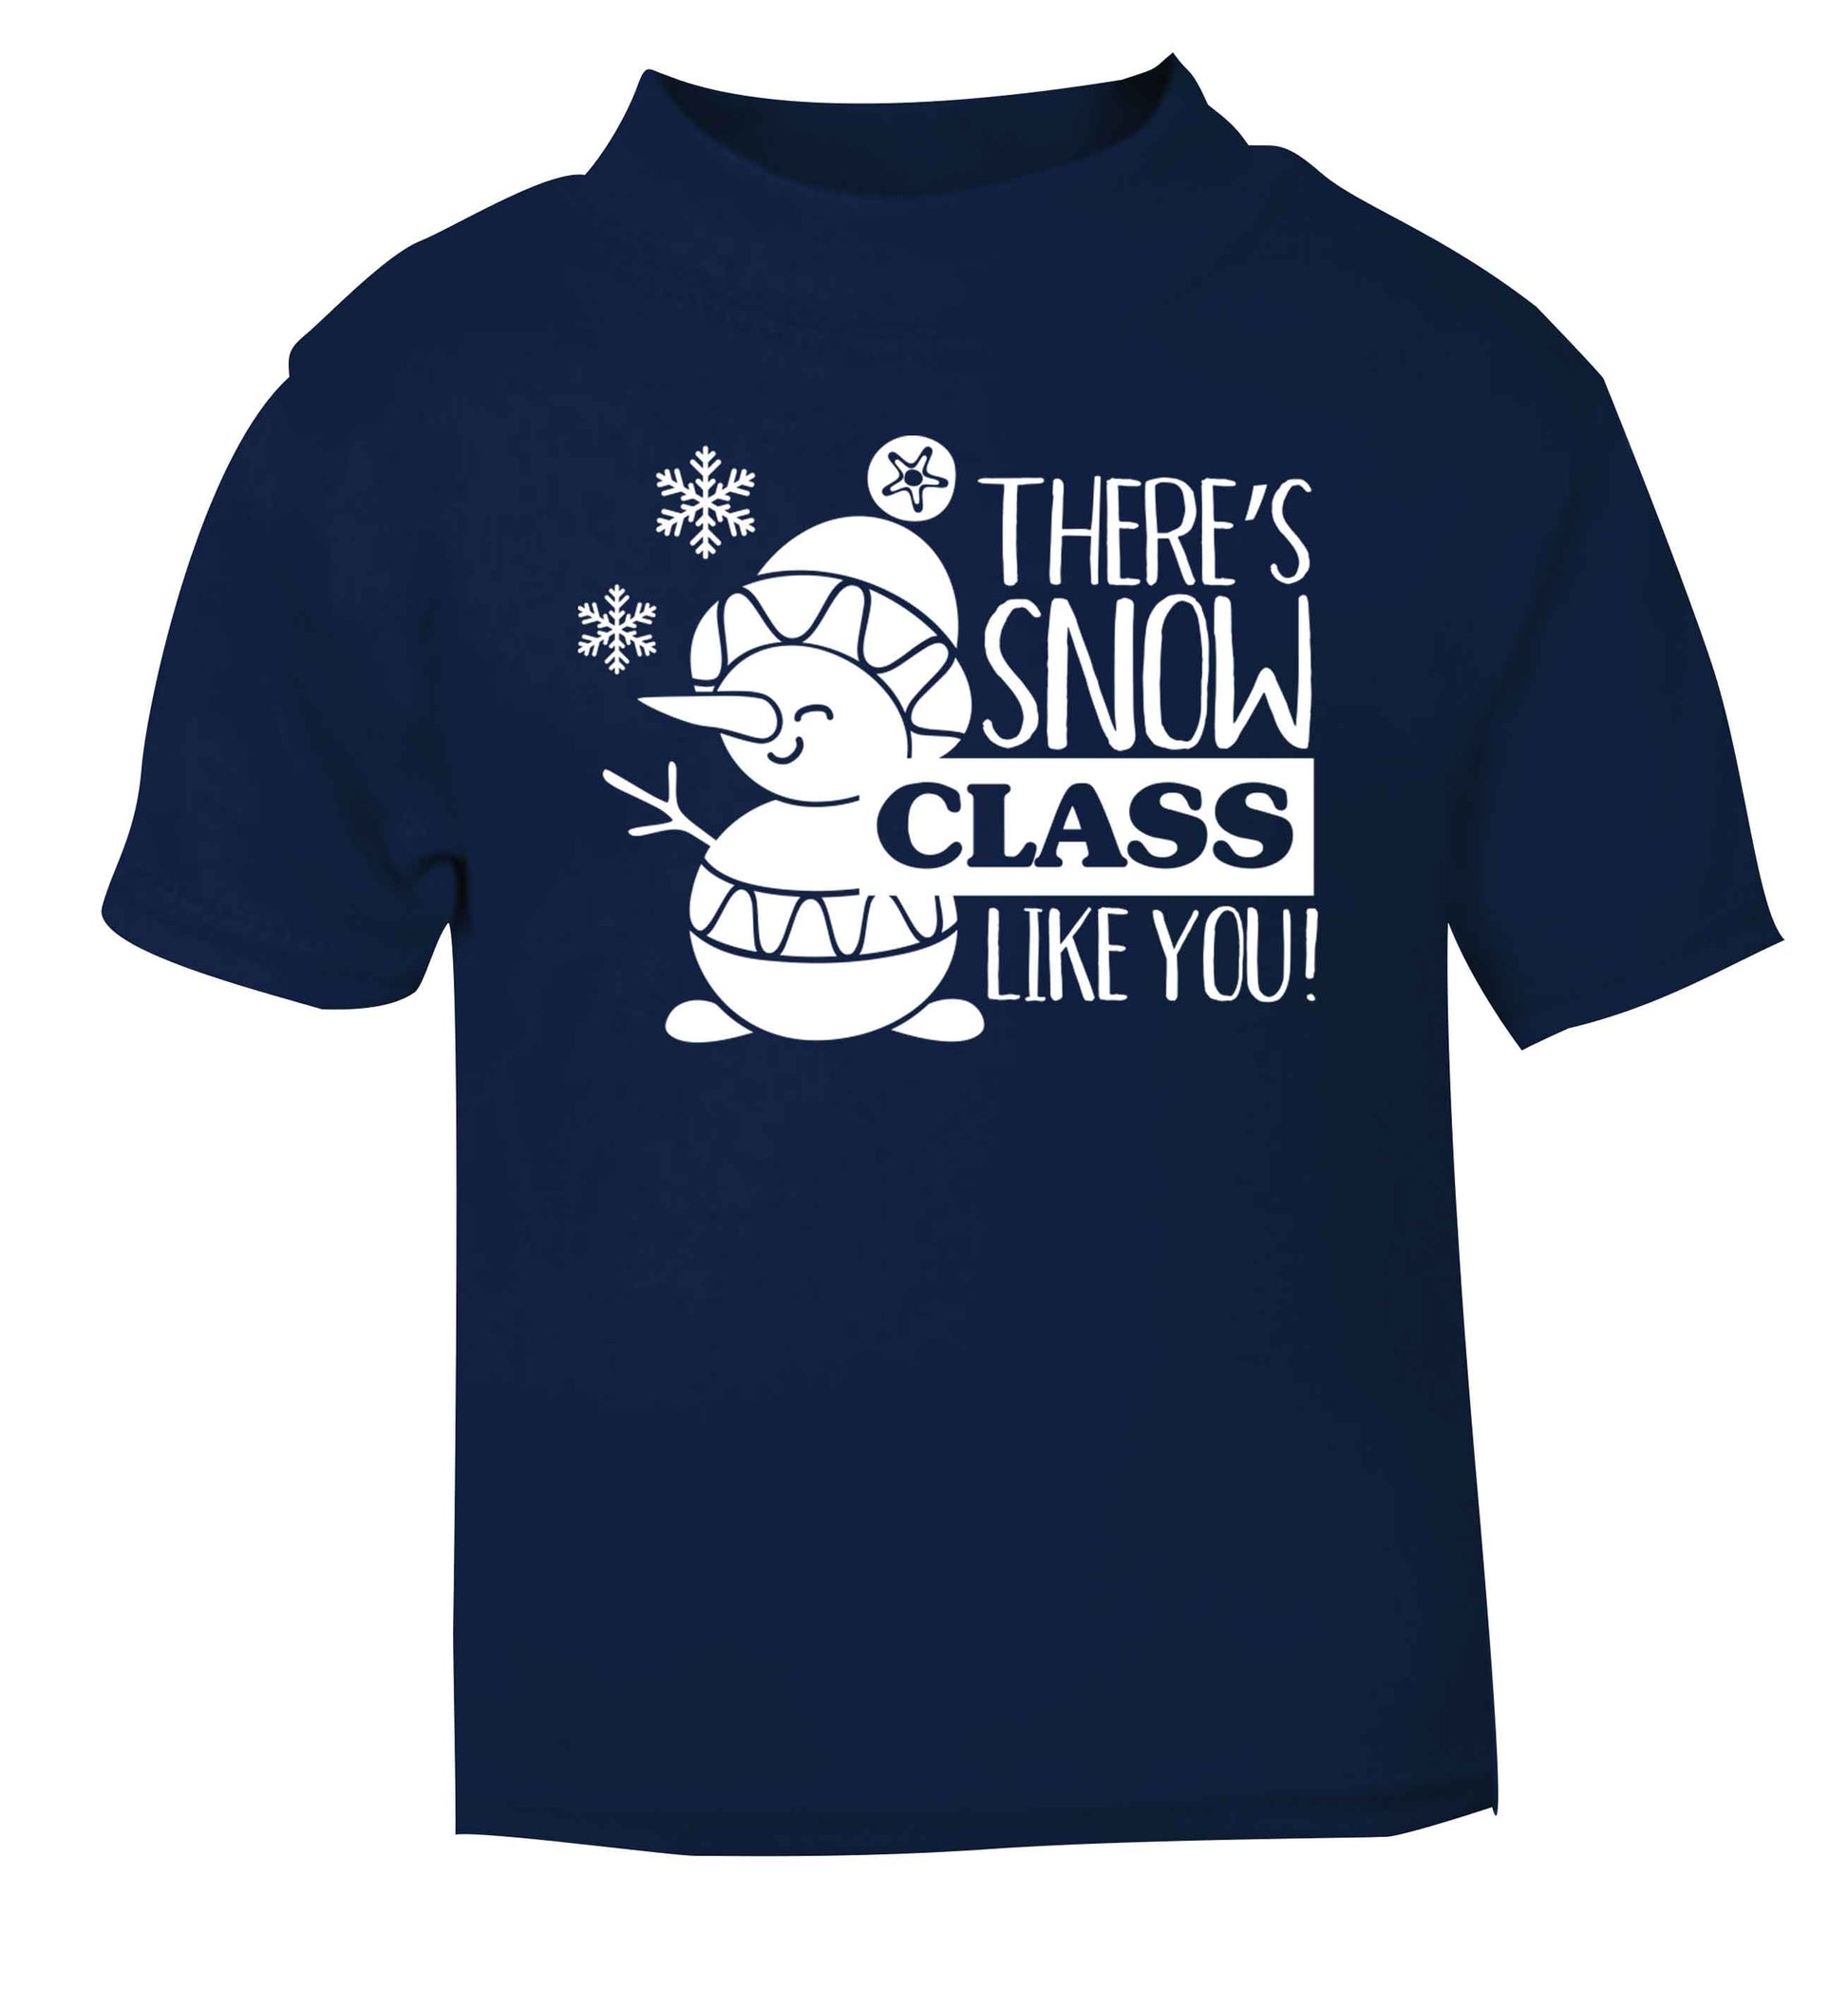 There's snow class like you navy baby toddler Tshirt 2 Years